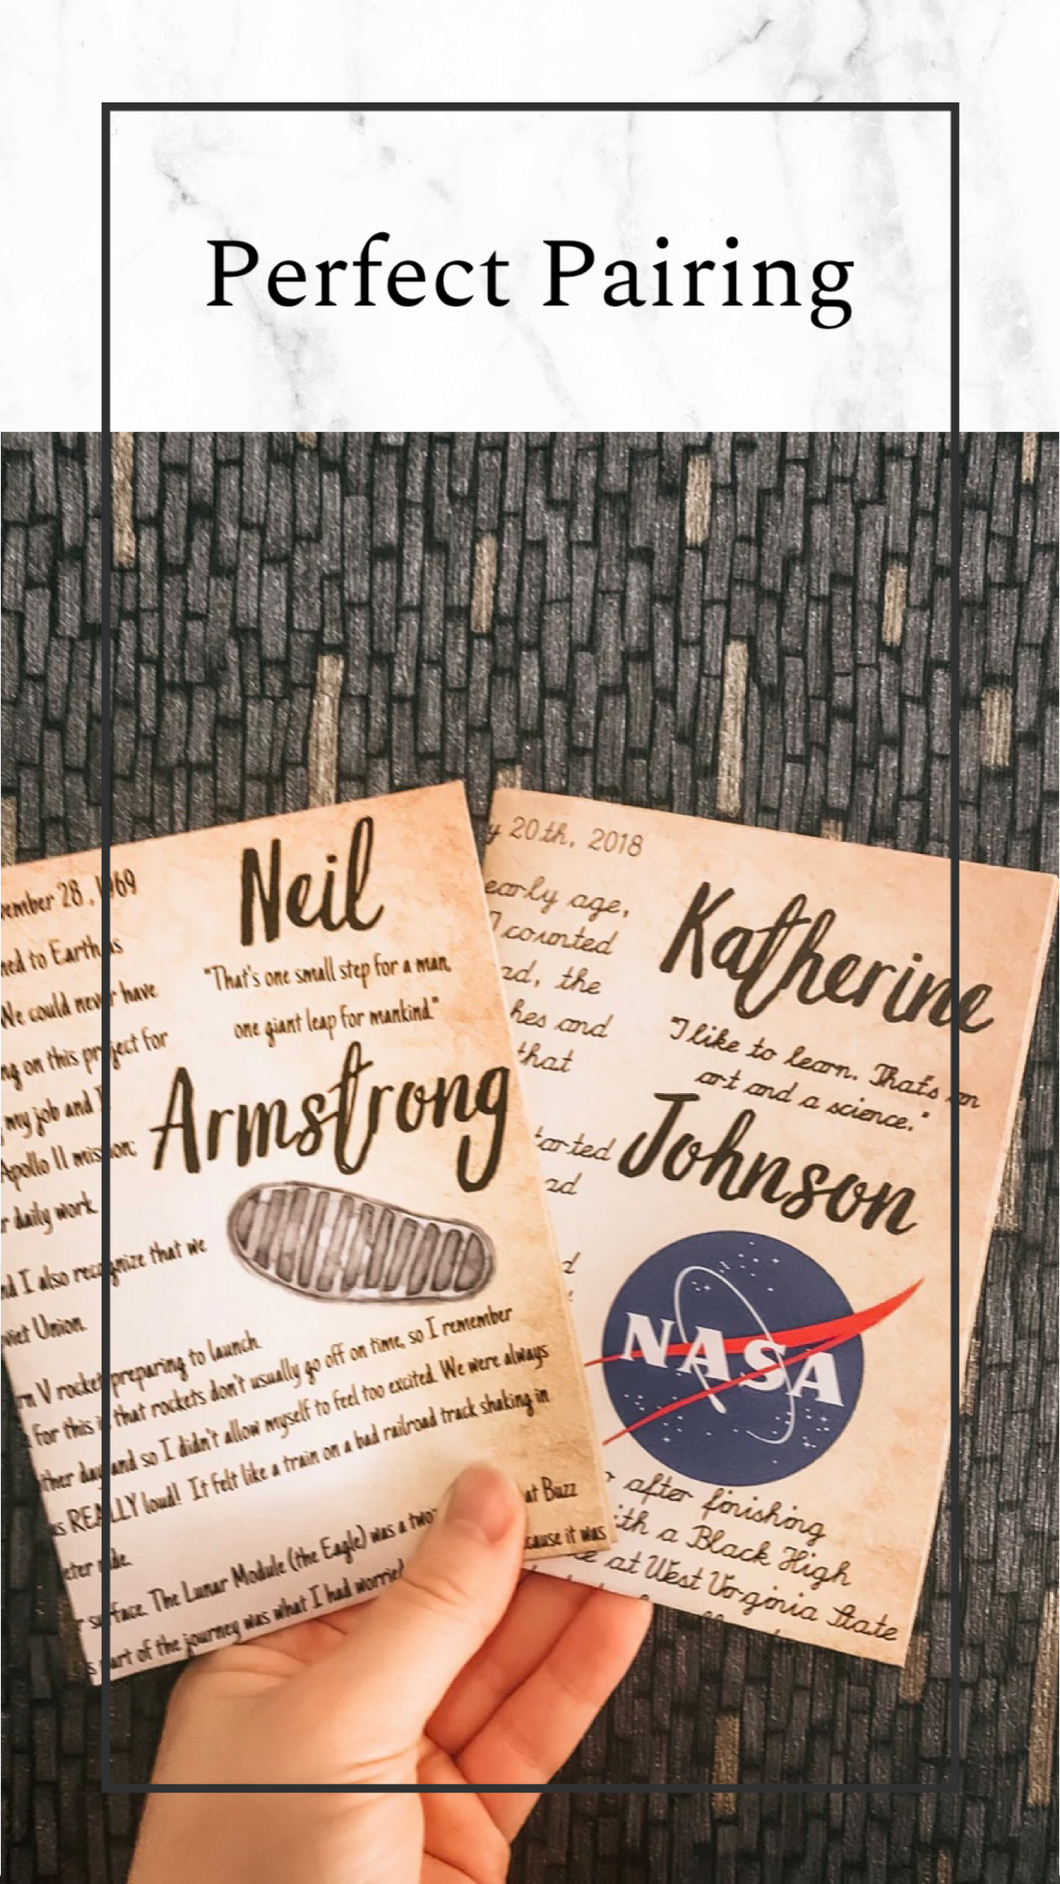 Perfect Pairing: Neil Armstrong & Katherine Johnson